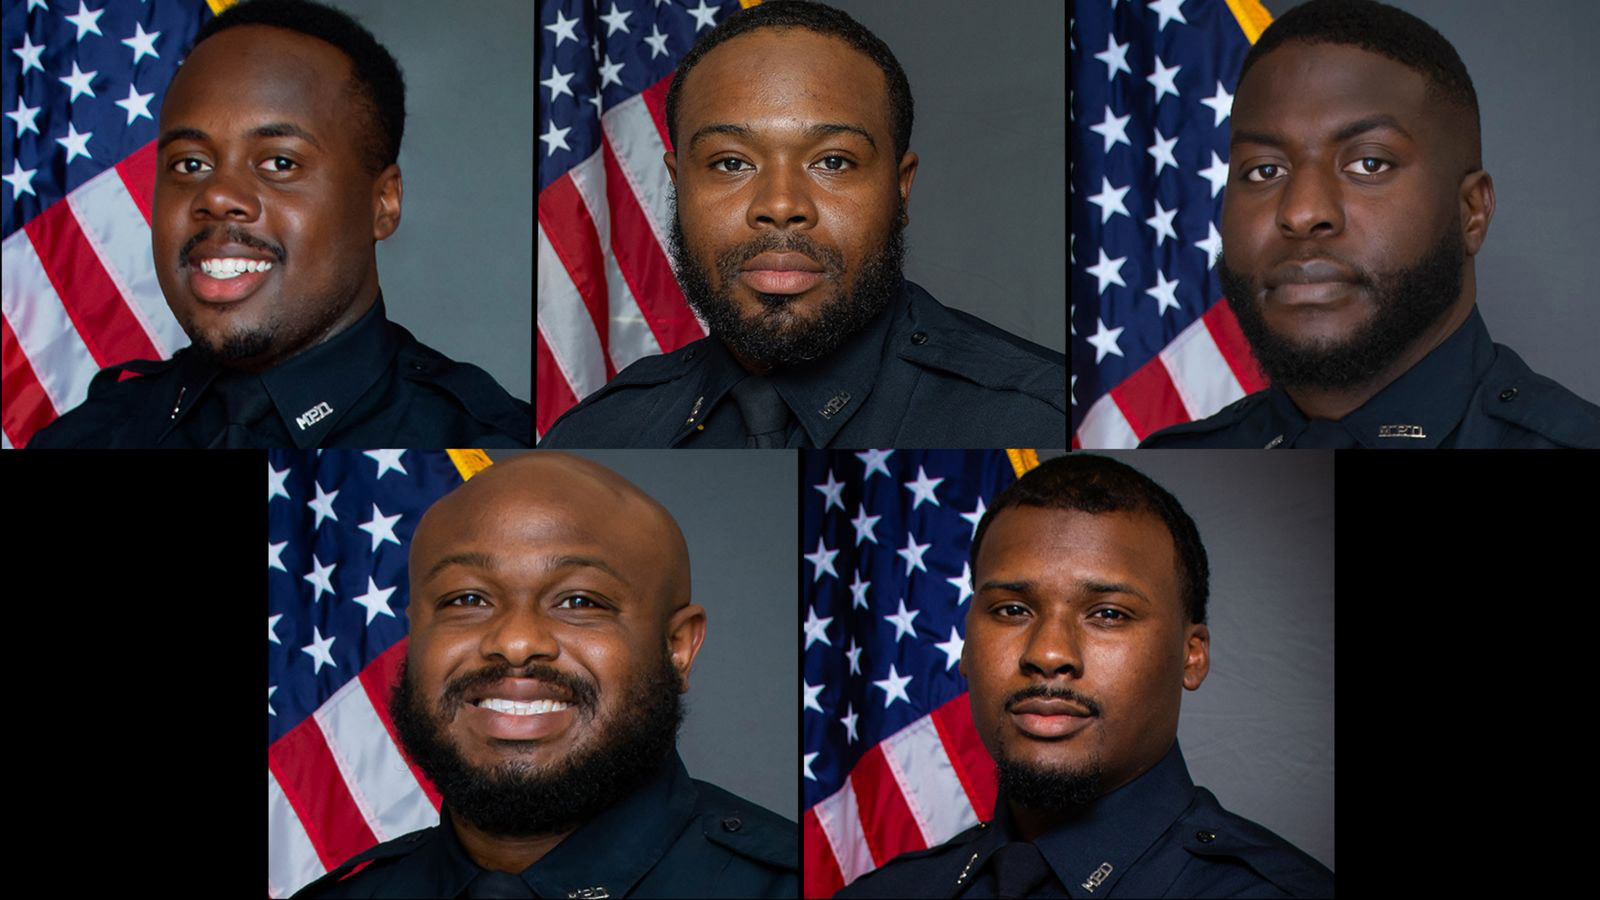 The Memphis Police Department Has Fired Five Police Officers In Connection With The Death Of Tyra Nichols.  Above: Taddeus Bean, Demetrius Haley, Emmitt Martin Iii.  Bottom: Desmond Mills, Jr., Justin Smith